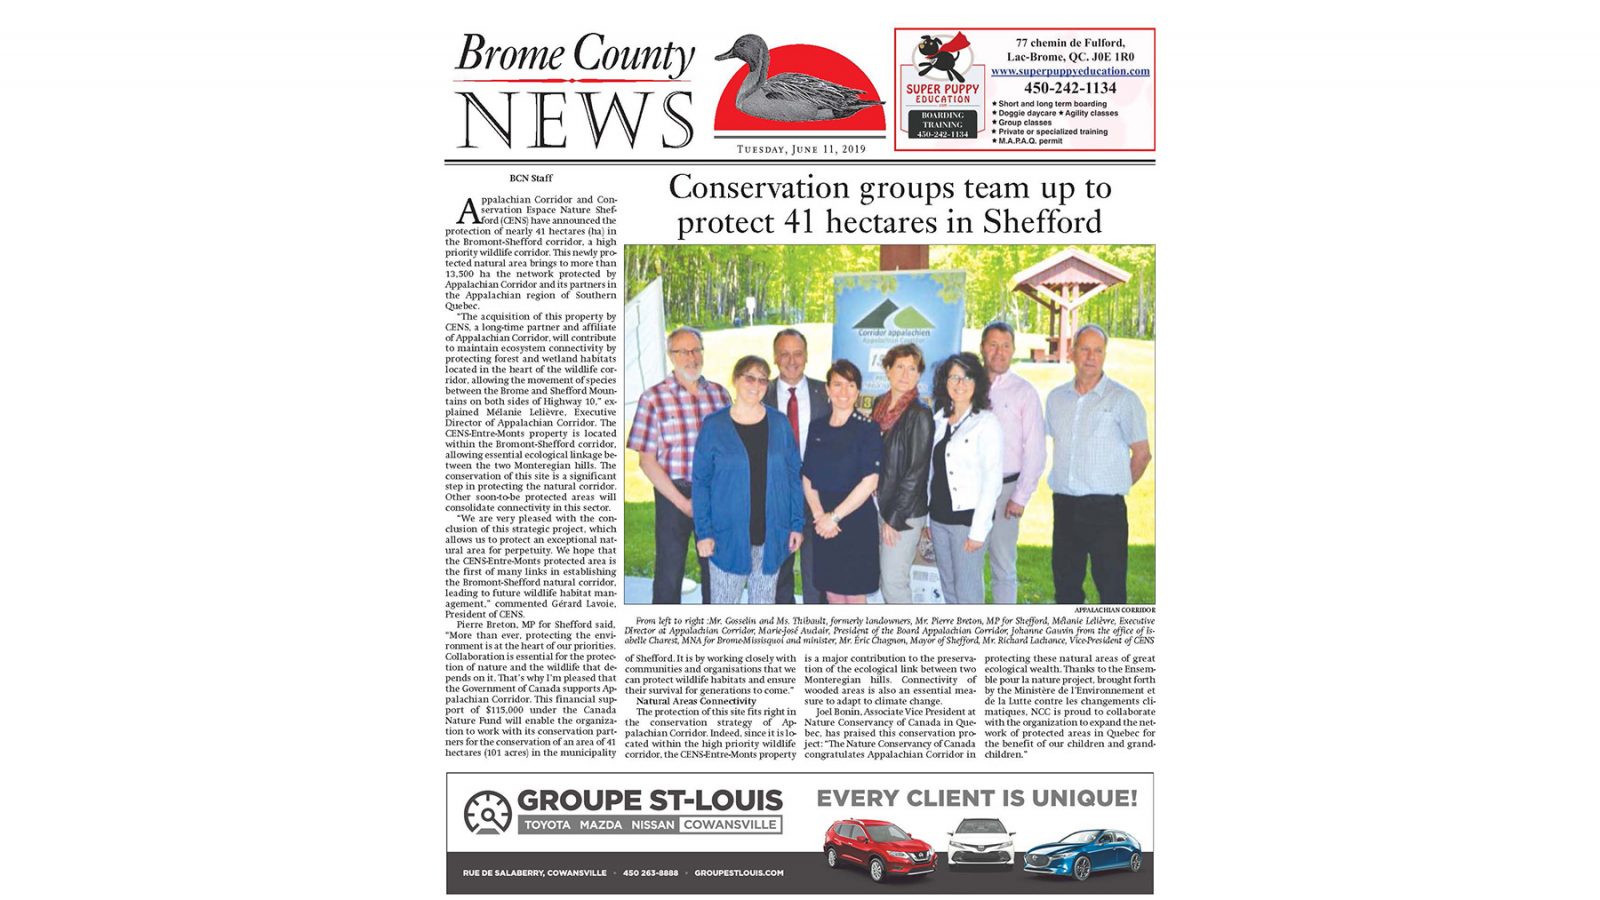 Brome County News – June 11, 2019 edition